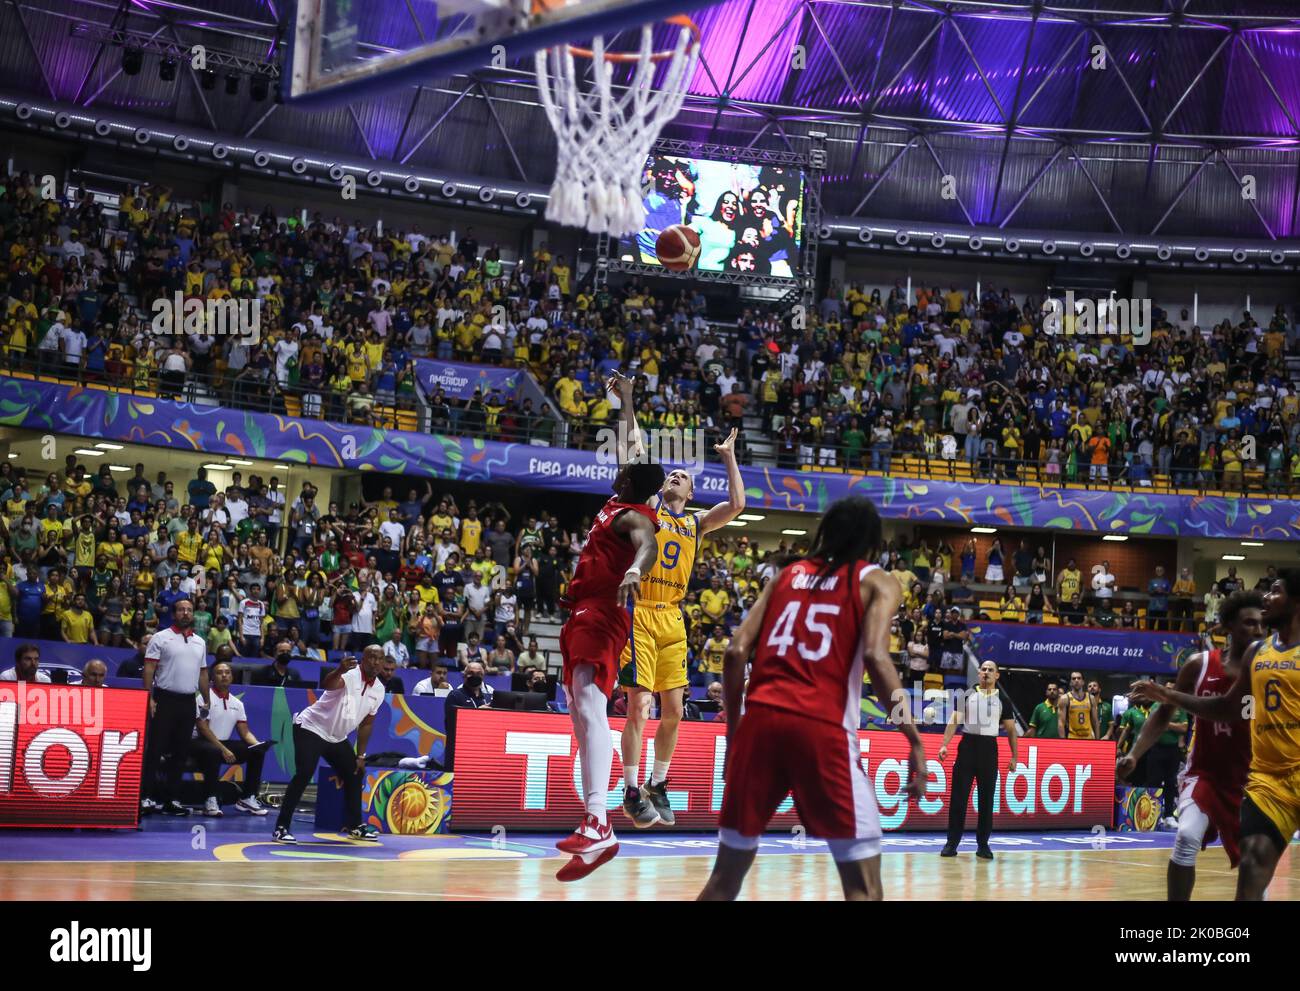 Recife, Brazil. 10th Sep, 2022. Marcelinho Huertas (BRA), during the game between Brazil and Canada, valid for the semifinal of the Copa América Men's Basketball, the Americup FIBA 2022, held at the Ginásio Geraldo Magalhães, known as Ginásio Geraldão, in Recife (PE), Brazil, this Saturday (10). Credit: Tiago Caldas/FotoArena/Alamy Live News Stock Photo